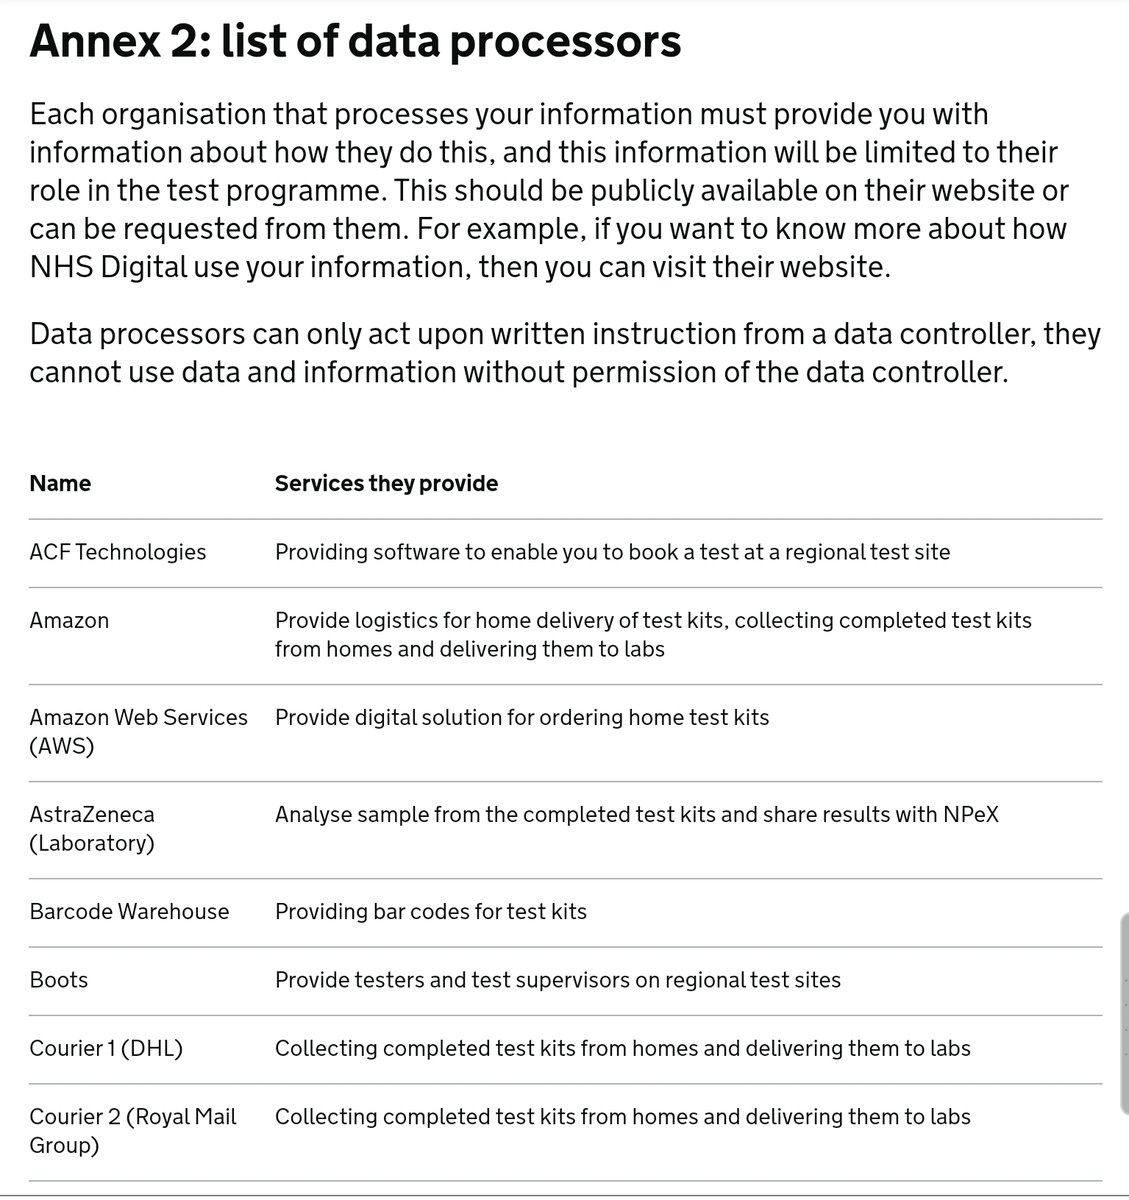 Fascinating to see the entire list of data processors associated with this national covid-19 testing initiative, and it also makes you realise how many different organisations are needed to pull it off, it's not just the NHS!! 12/n